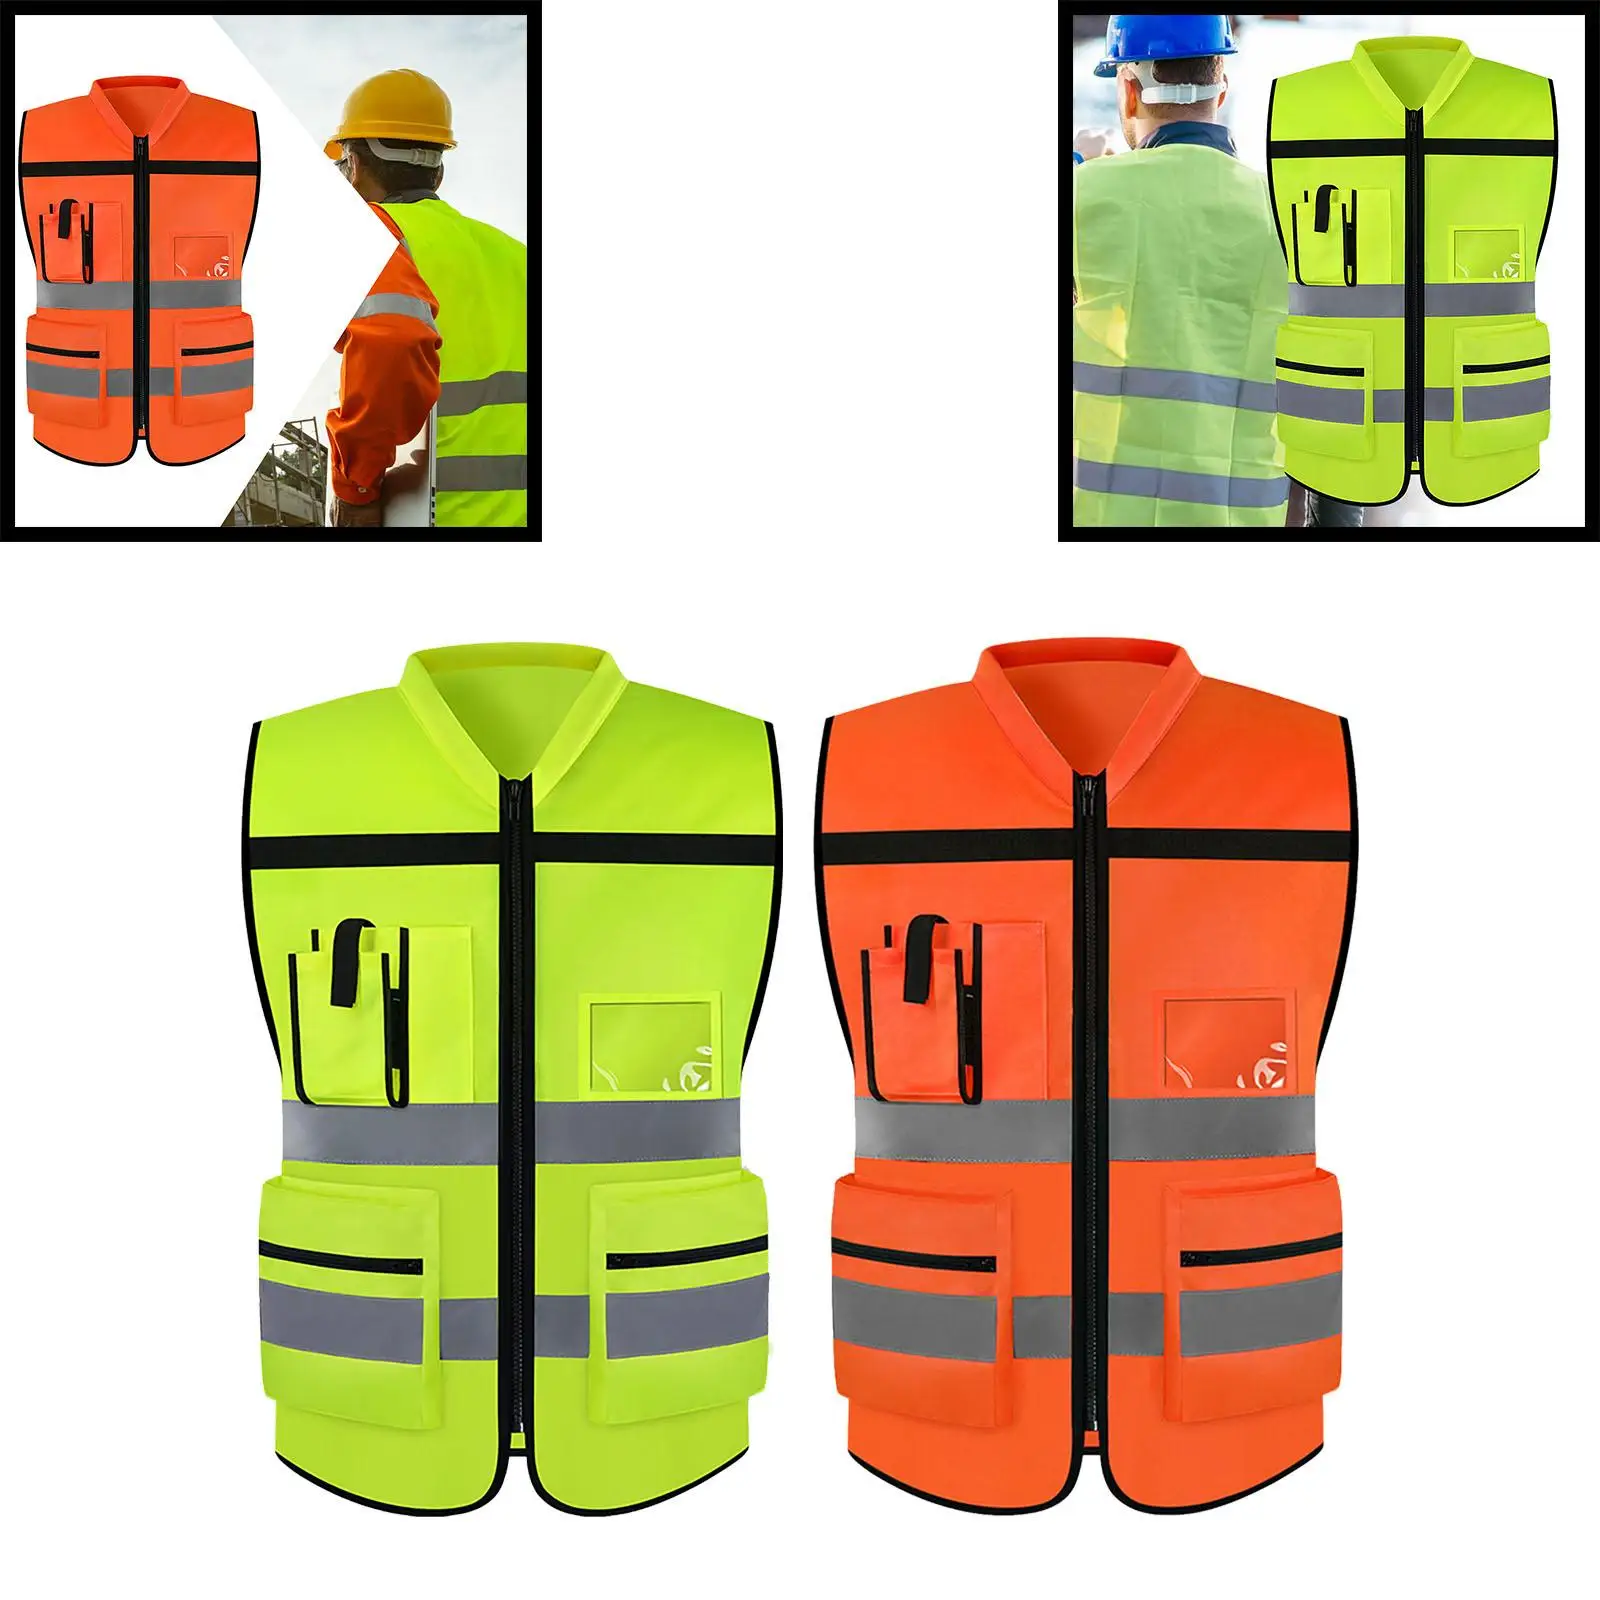 Reflective Safety Vest with Reflective Strips for Cycling Biking Walking